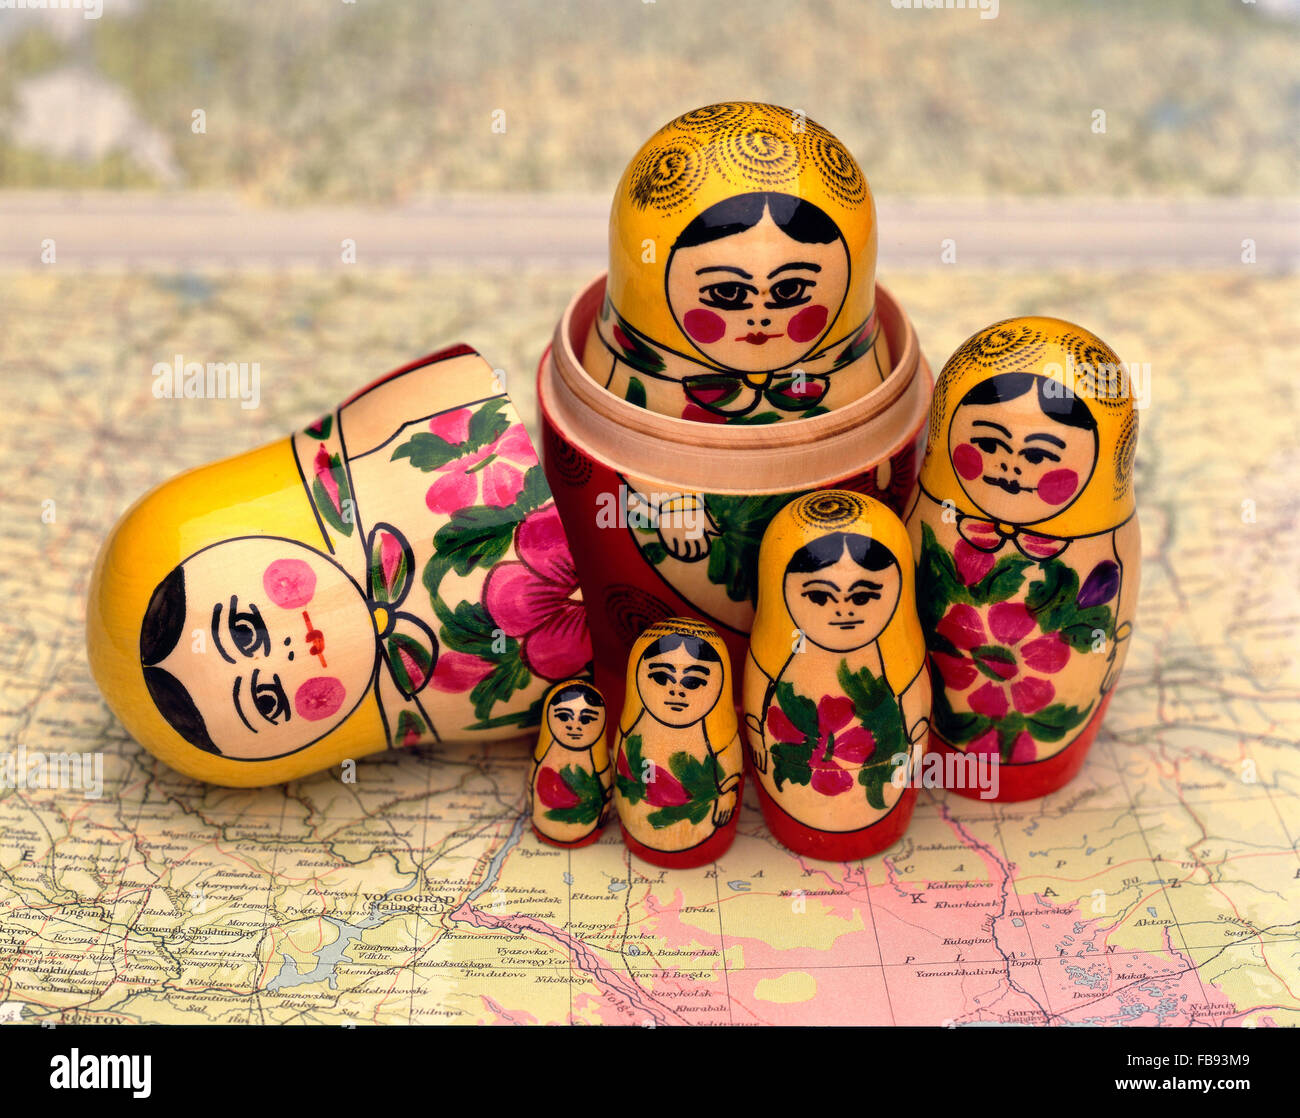 A wooden matryoshka doll, also known as a Russian nesting doll, on a map of Russia Stock Photo